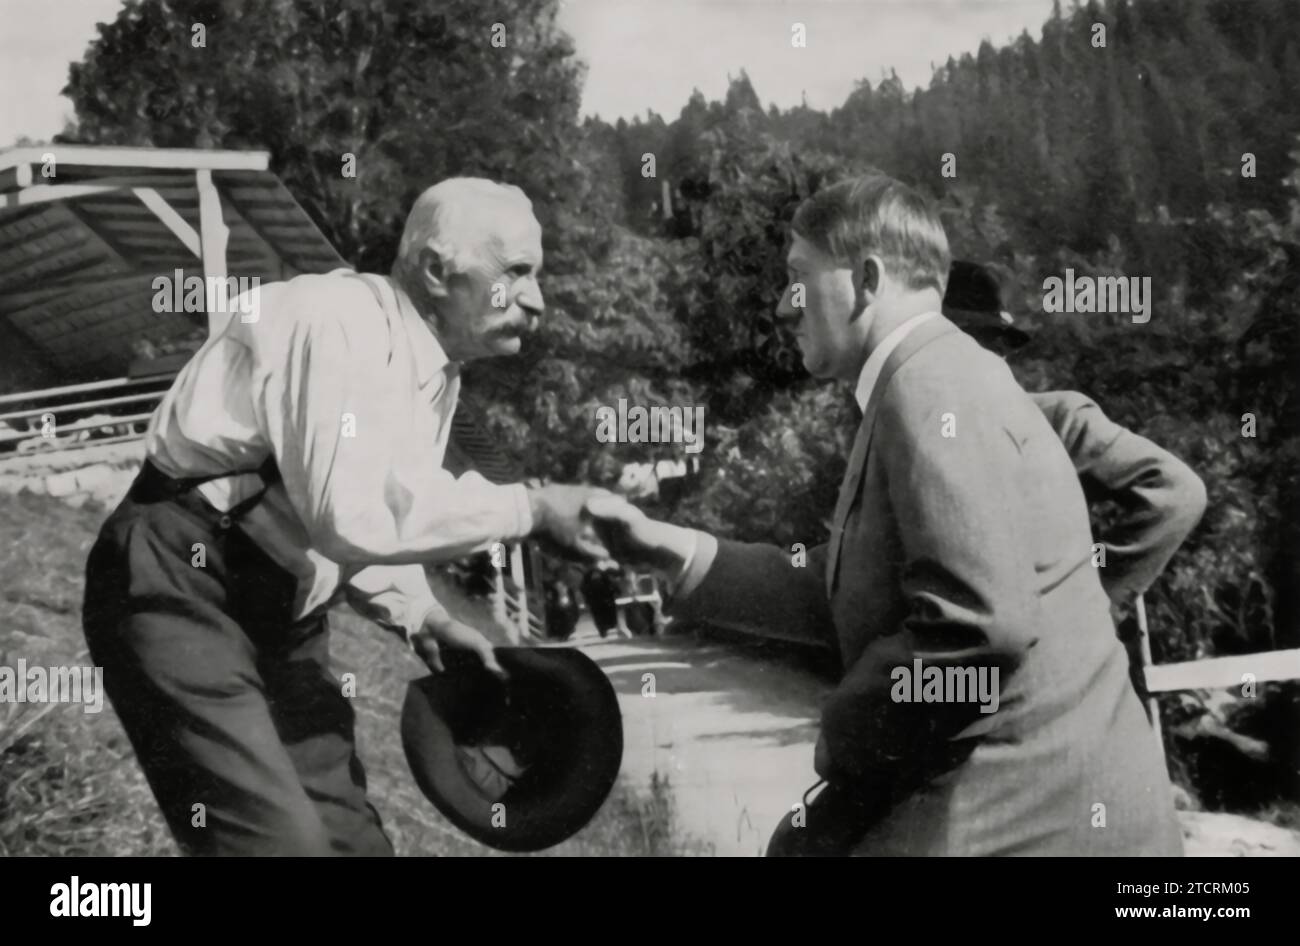 Adolf Hitler is depicted at Obersalzberg, shaking hands with an elderly neighbor. This image is likely intended to portray Hitler in a personable and approachable light, engaging with local residents in a friendly manner. The handshake with an elderly gentleman at his residence emphasizes a connection to the community, a scene crafted to present a more grounded and relatable aspect of his leadership to the public. Stock Photo